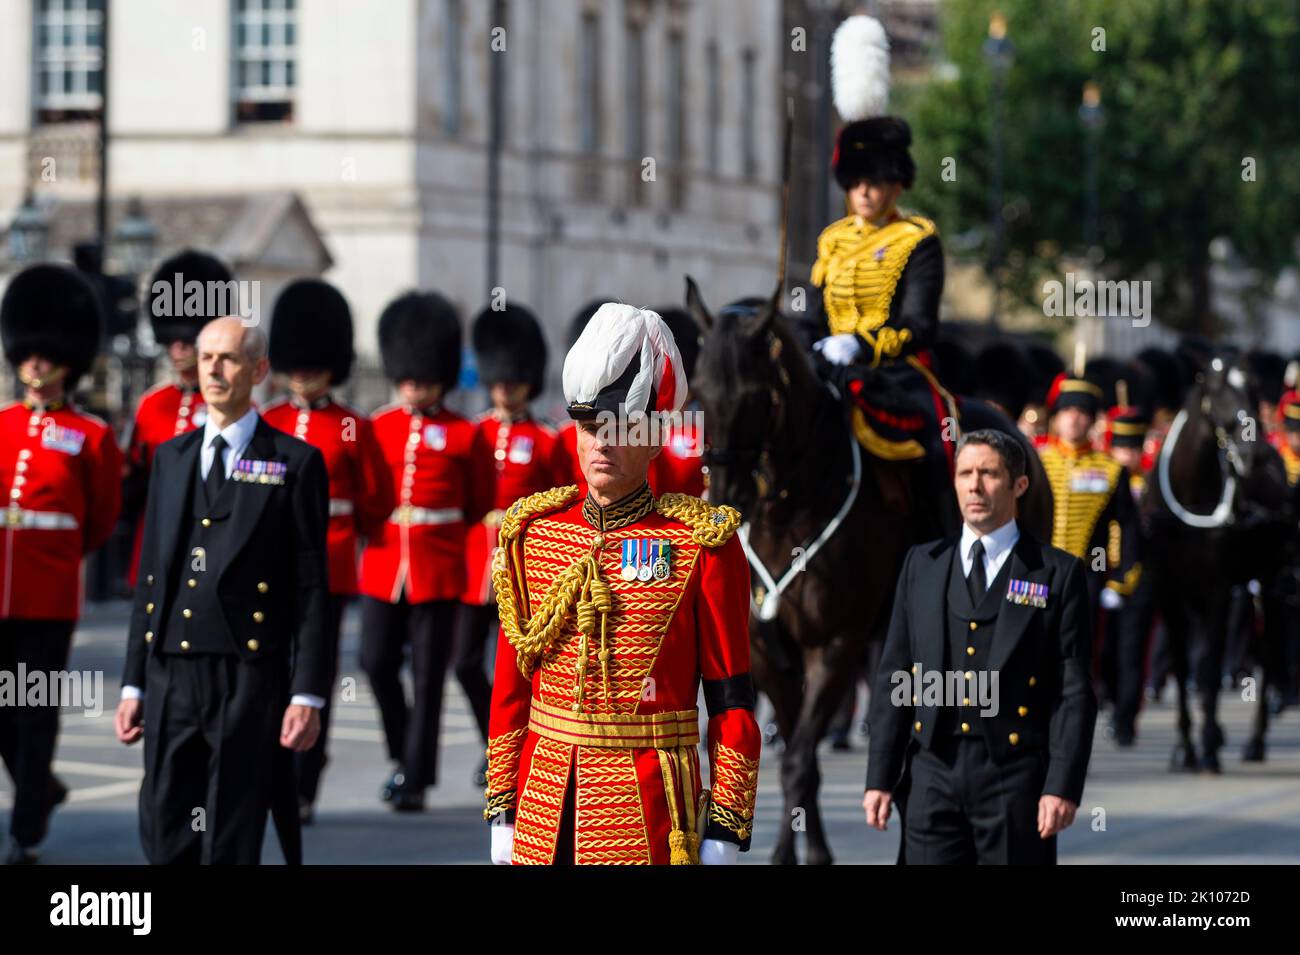 London, UK.  14 September 2022. Members of the military precede the late Queen’s coffin carried on a gun carriage in Whitehall en route to Westminster Hall where it will lie in state for four days allowing the public to visit to pay their respects, ahead of the state funeral on 19 September.  Queen Elizabeth II, the longest-reigning monarch in British history, died at the age of 96 in Balmoral, Scotland and her son, now known as King Charles III, has succeeded her.  Credit: Stephen Chung / Alamy Live News Stock Photo